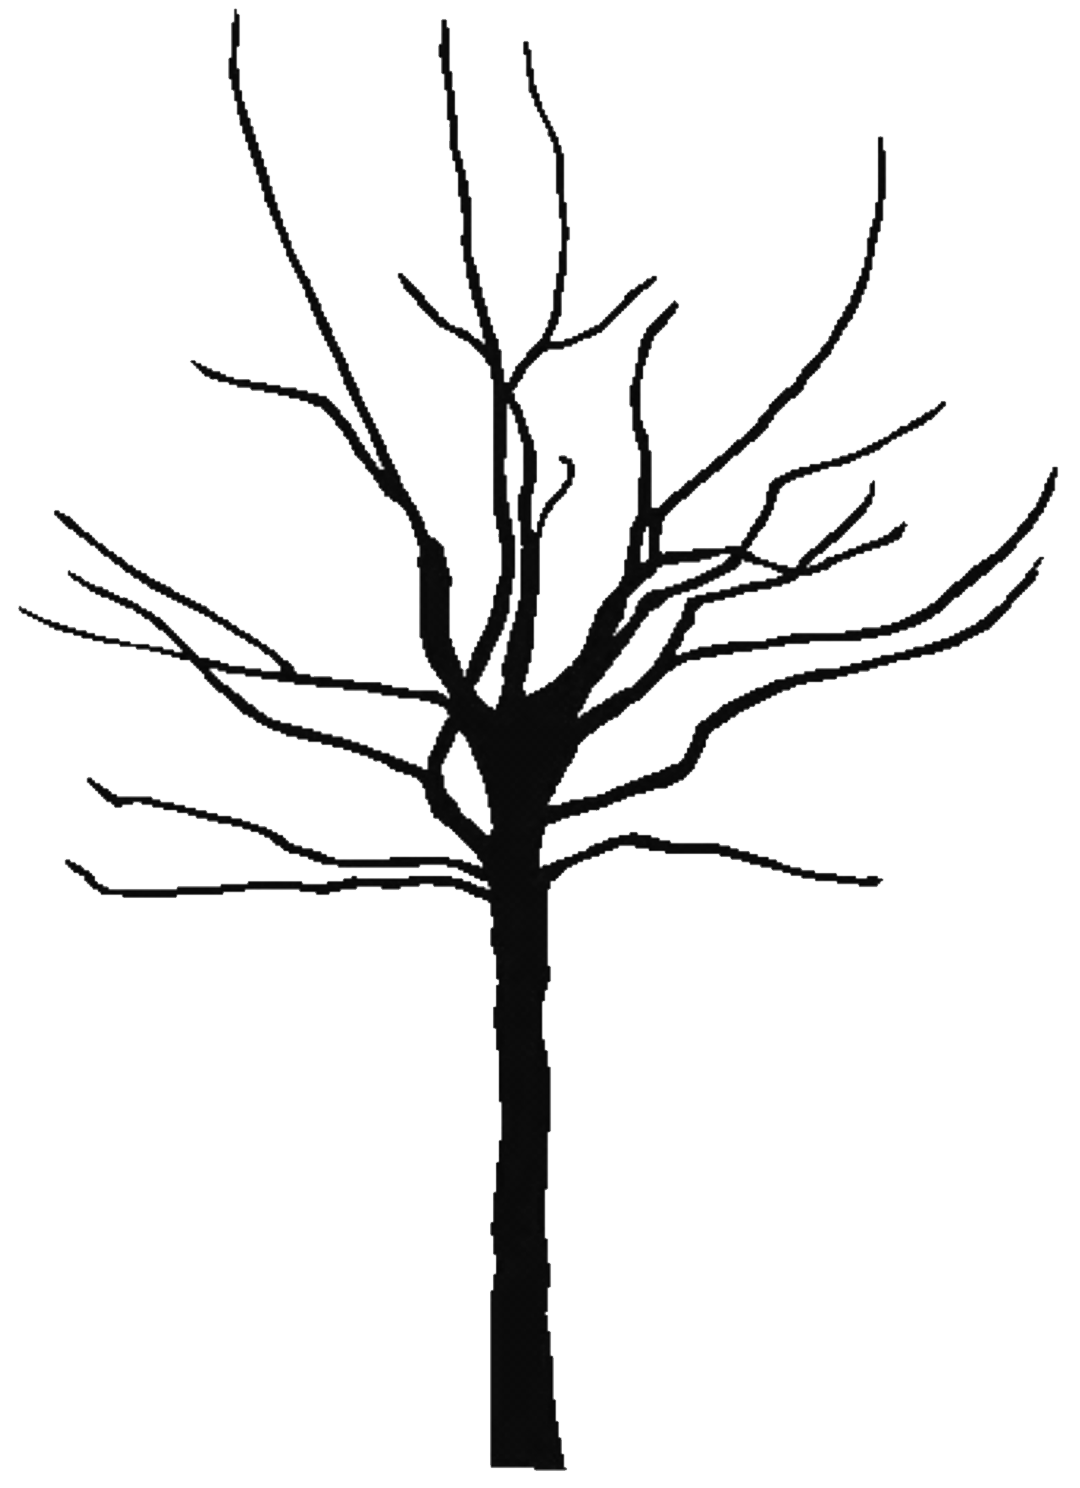 Tree outline coloring page - Coloring Pages & Pictures - IMAGIXS